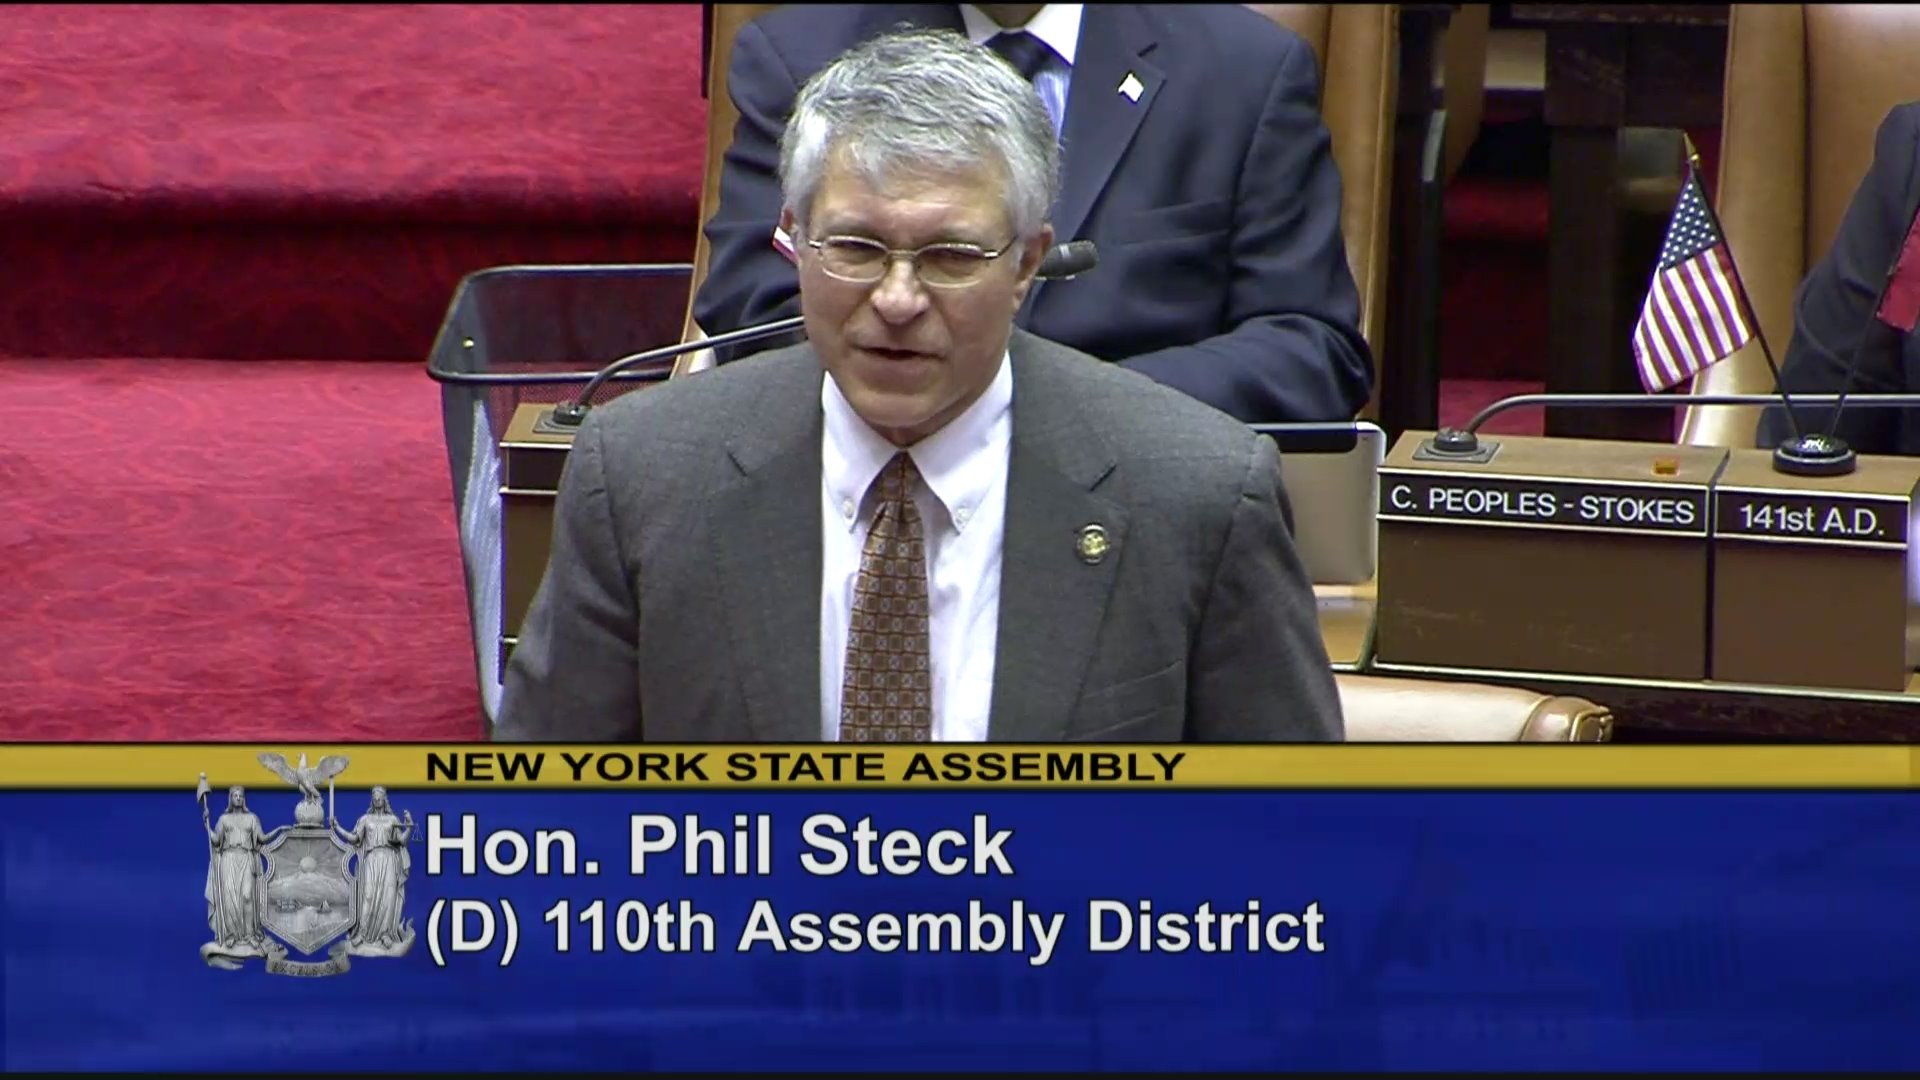 Steck Speaks on Authorization of Petroleum Gas Delivery in an Emergency